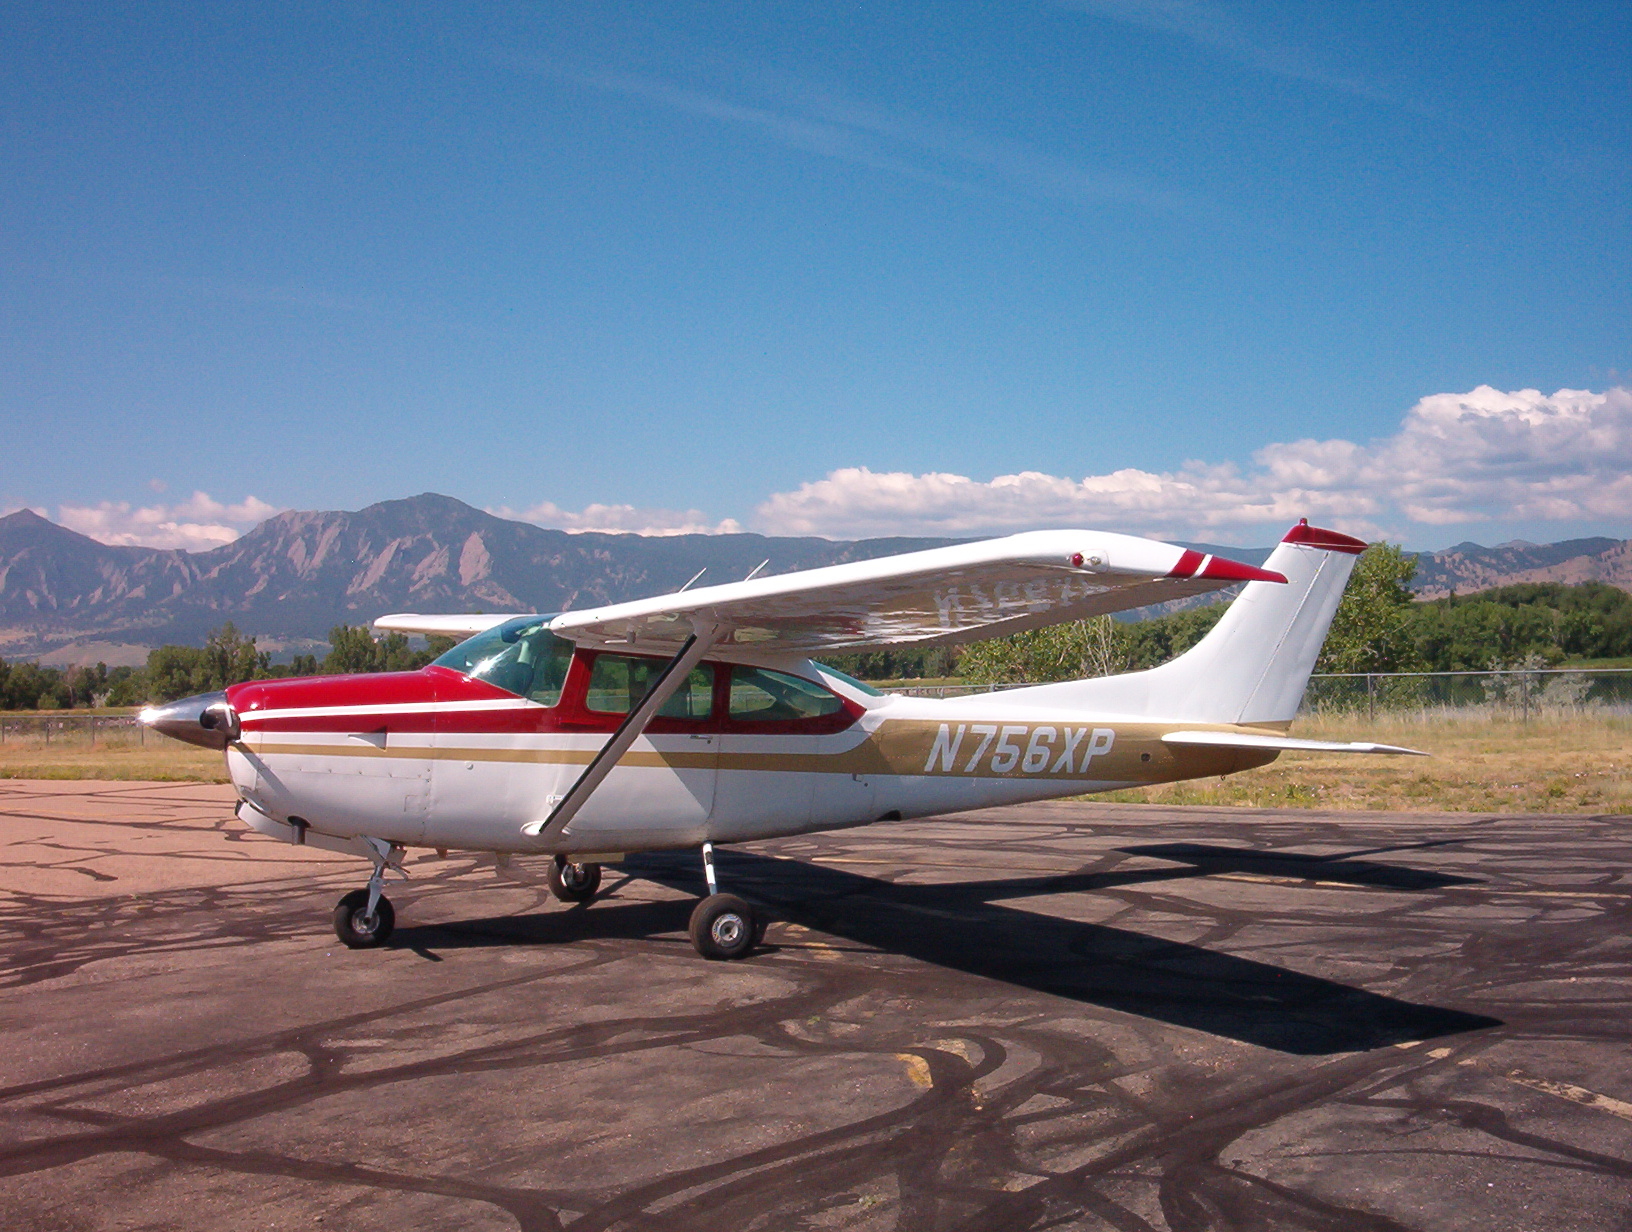 TR182 N756XP aircraft for rental at Specialty Flight Training, Inc Learn to Fly Boulder, CO